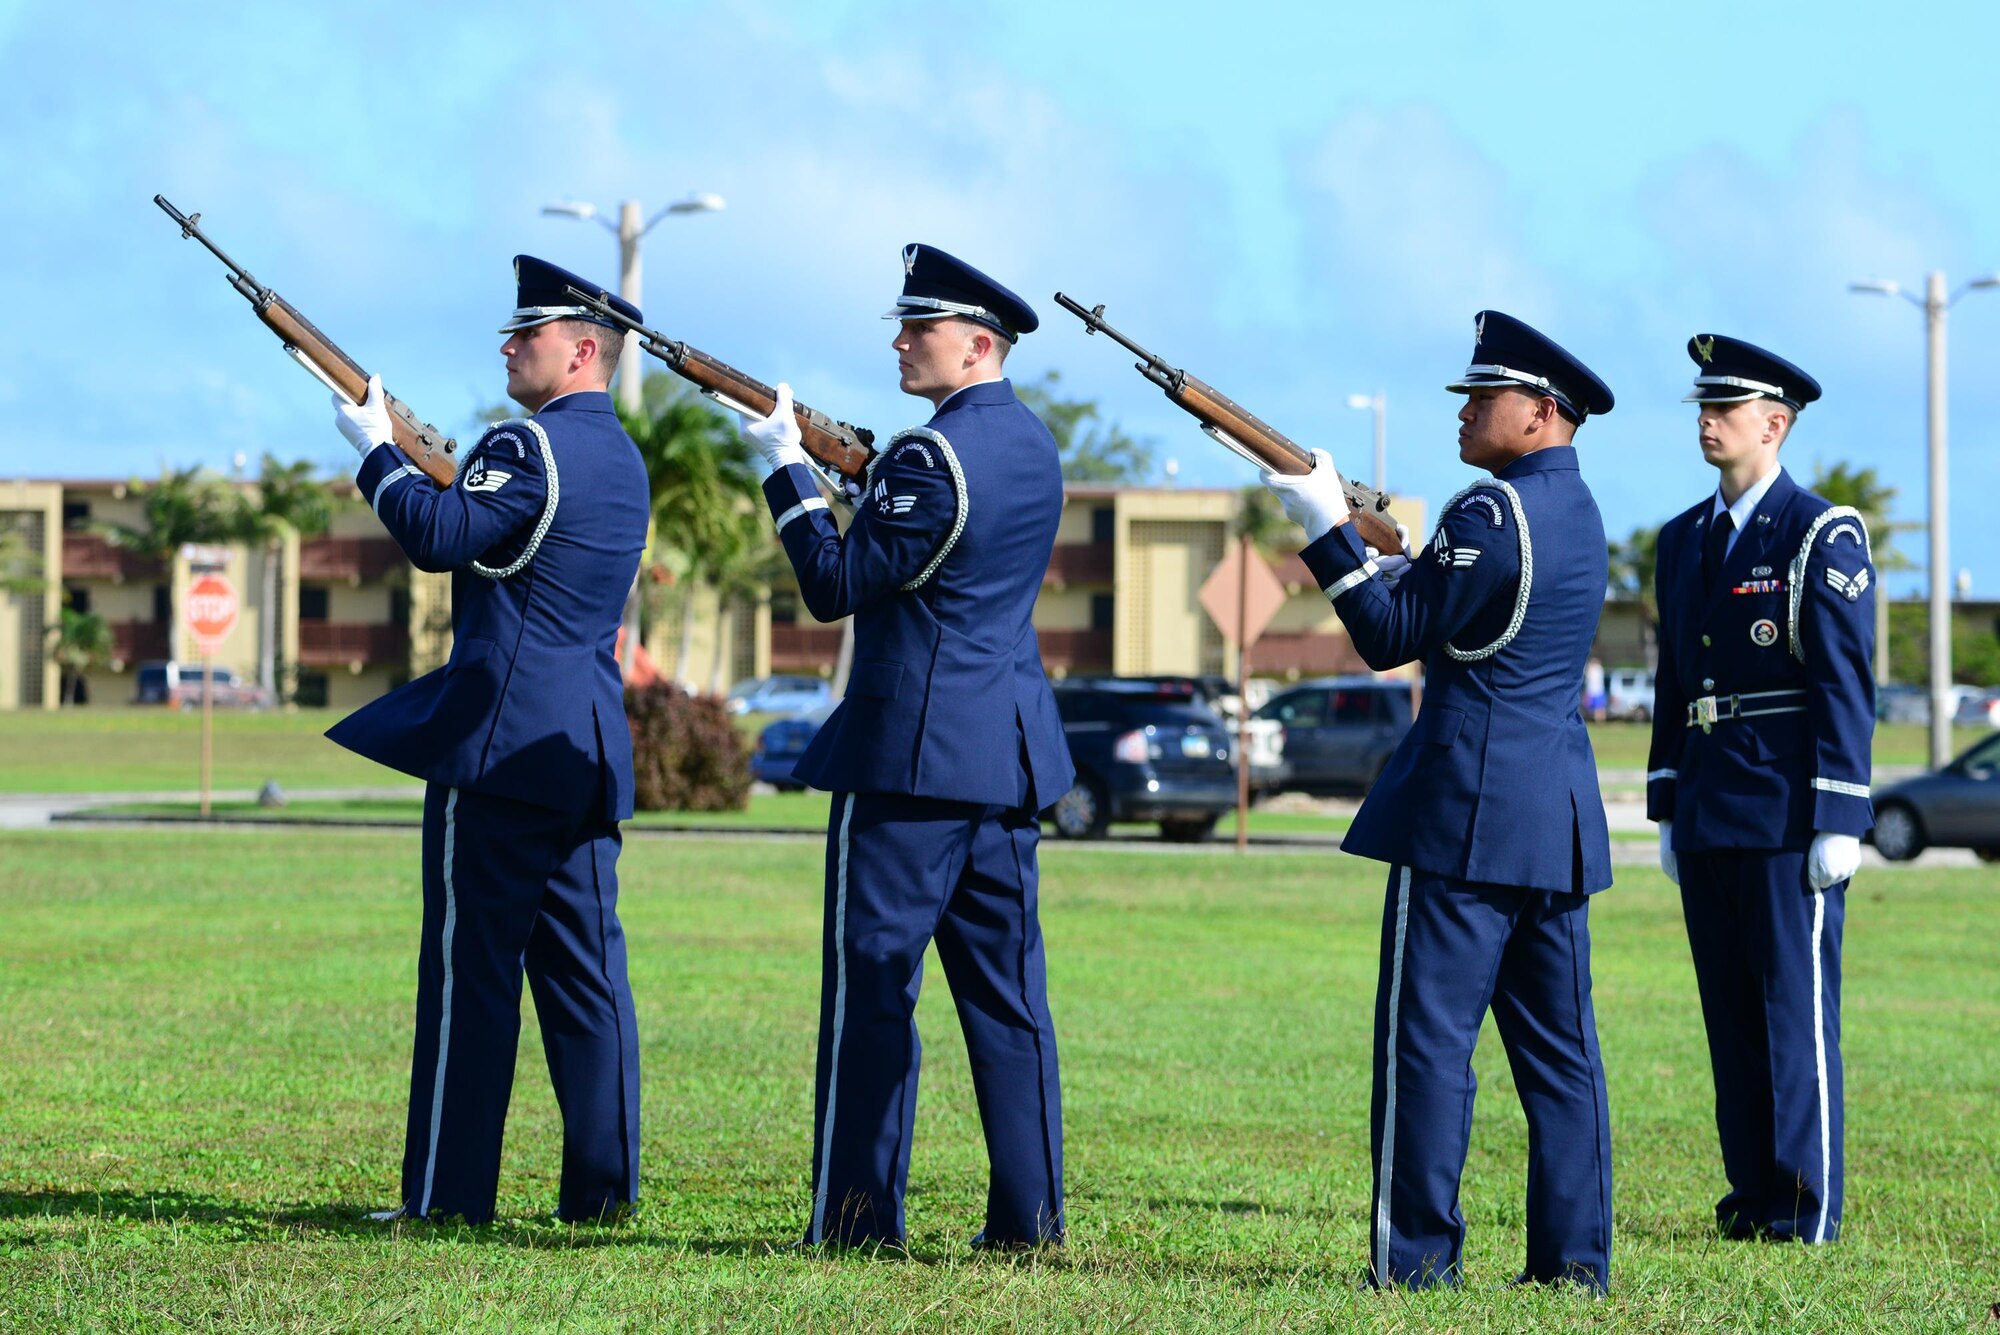 A firing party, from Andersen Air Force Base’s Honor Guard, releases a three-round volley during the Operation Linebacker II Remembrance Ceremony Dec. 16, 2016, at Andersen Air Force Base, Guam. A formation of 33 Airmen stood at the ceremony to represent the 33 who lost their lives flying in B-52 Stratofortress bombers during Operation Linebacker II. (U.S. Air Force photo/Airman 1st Class Jacob Skovo)